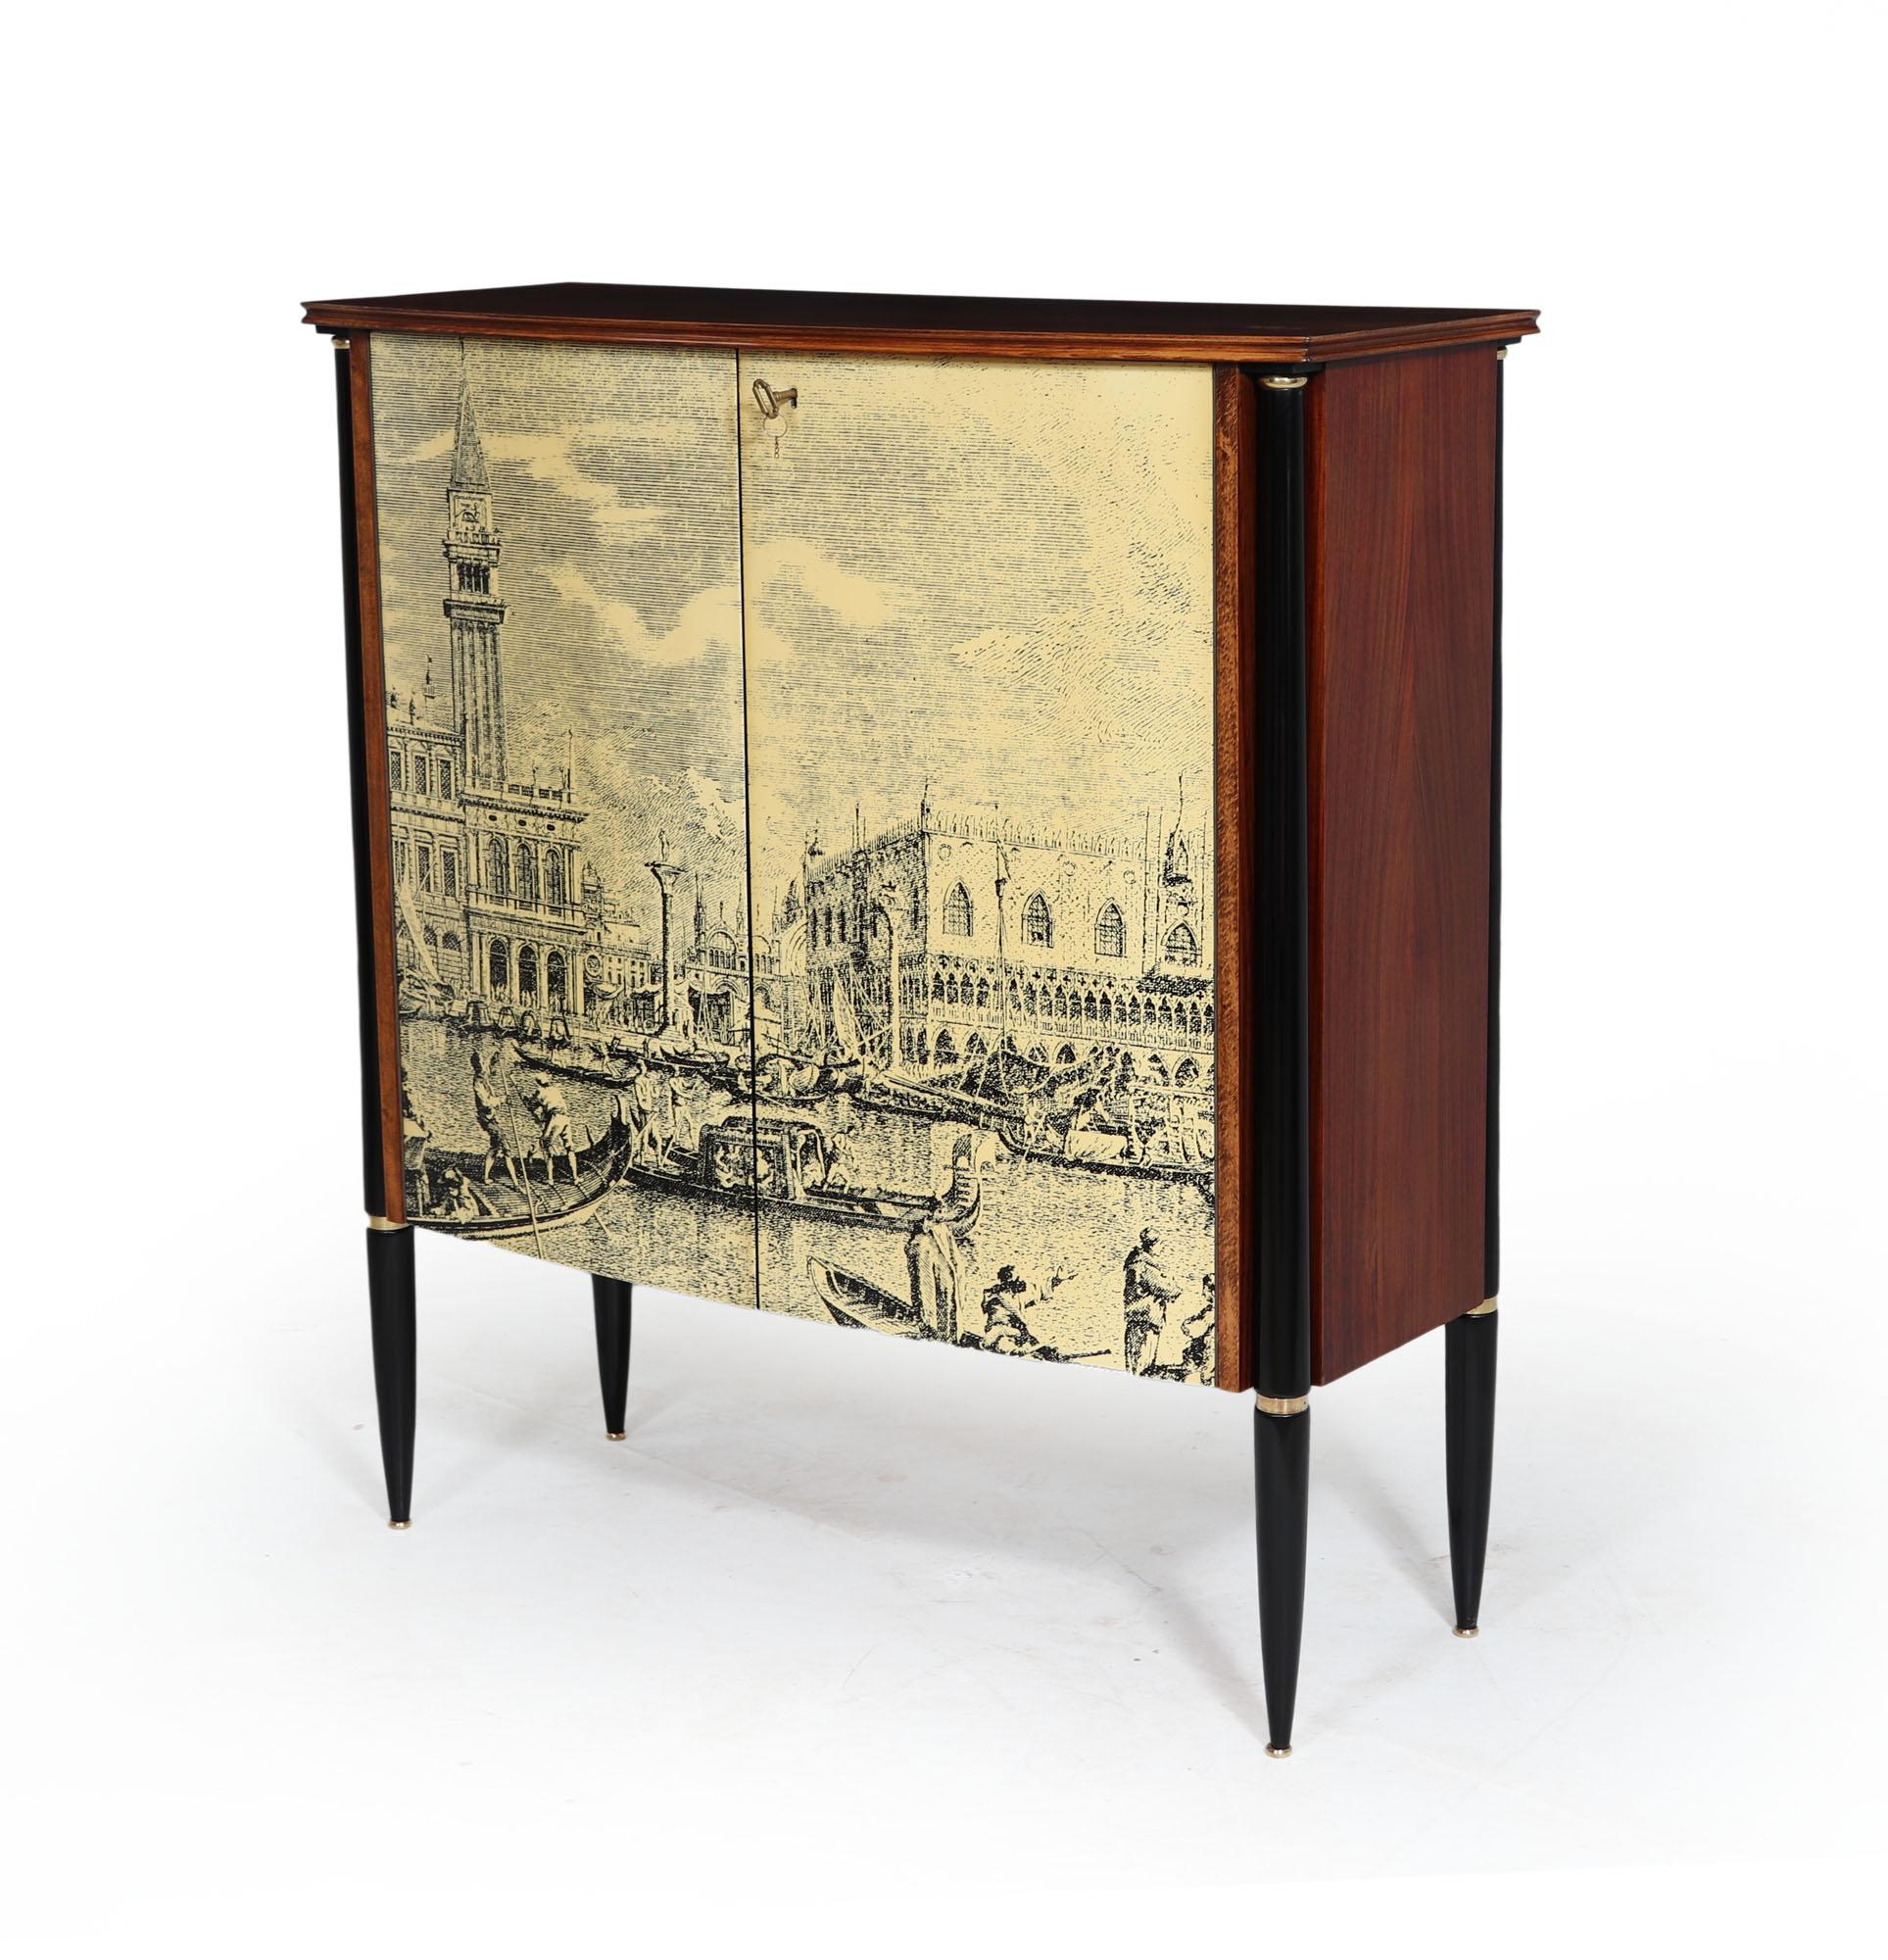 ITALIAN MID CENTURY COCKTAIL CABINET
Produced in Italy in the 1950’s in the Manner of Piero Fornasetti the walnut cabinet is supported by ebonised turned legs with brass detail and feet. To the bowed door front is a lithograph printed classic scene